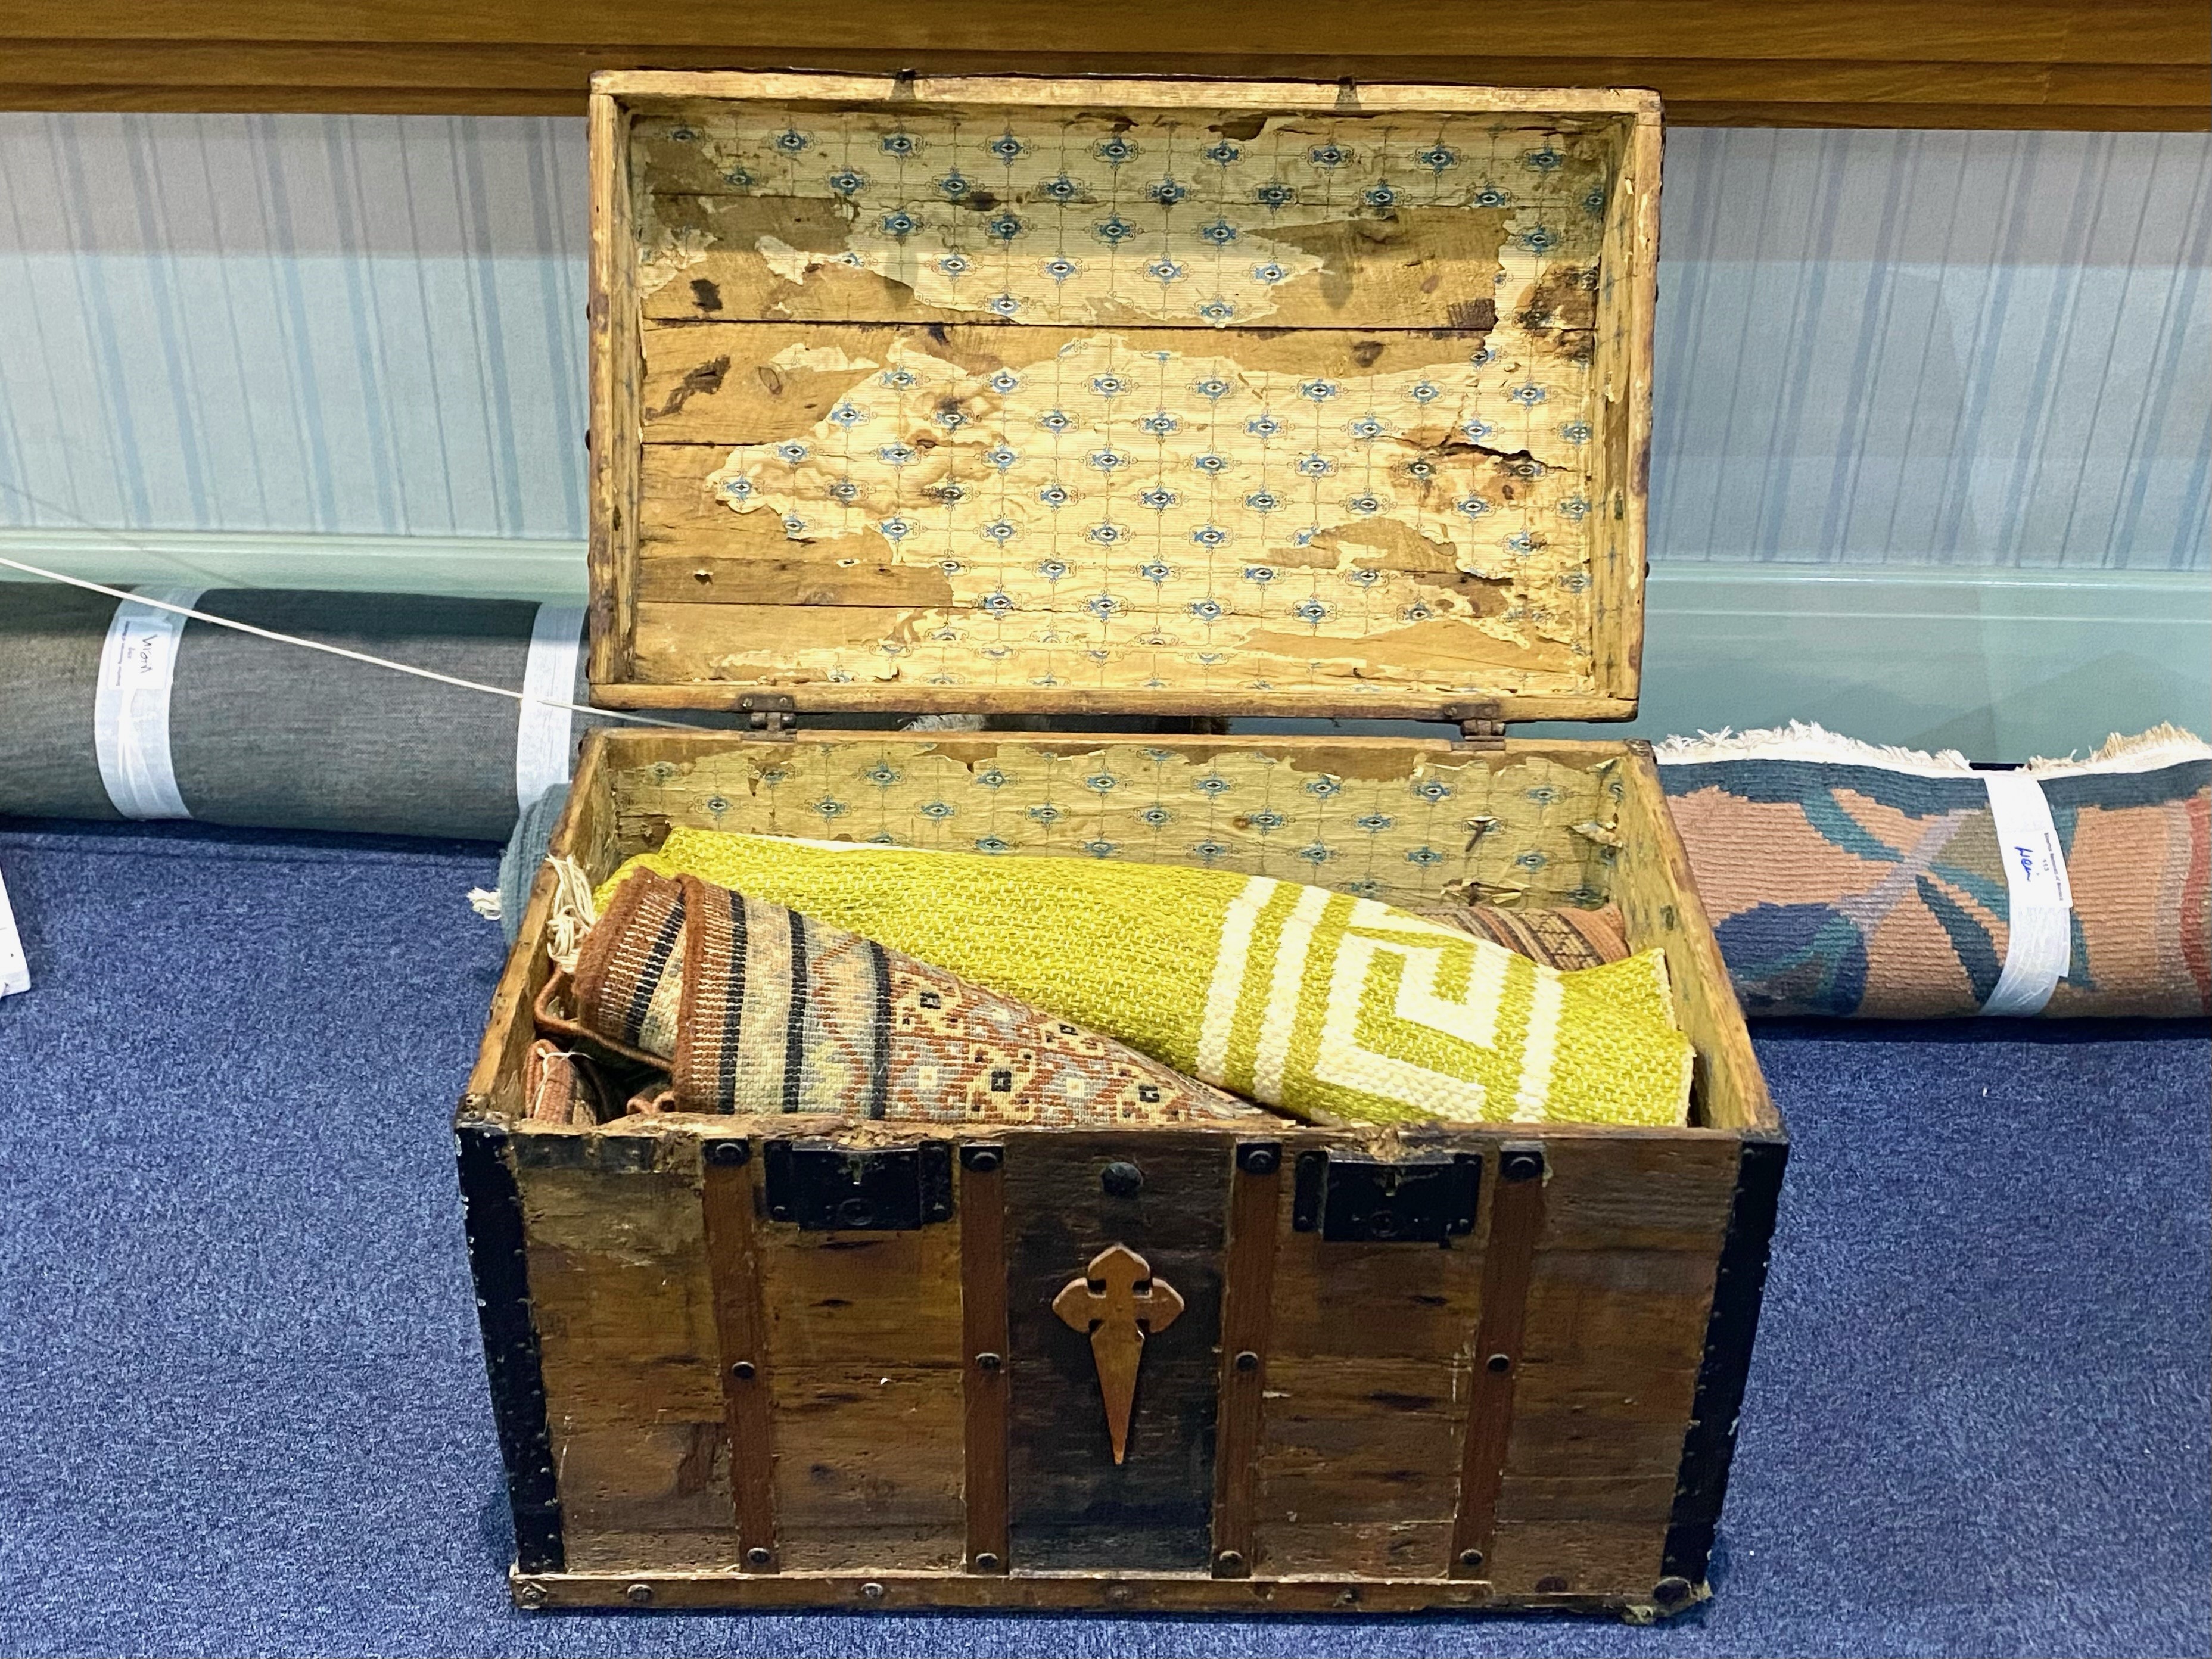 Large Wooden Metal Bound Trunk, with a collection of small rugs. Trunk full of small rugs, various - Image 5 of 5